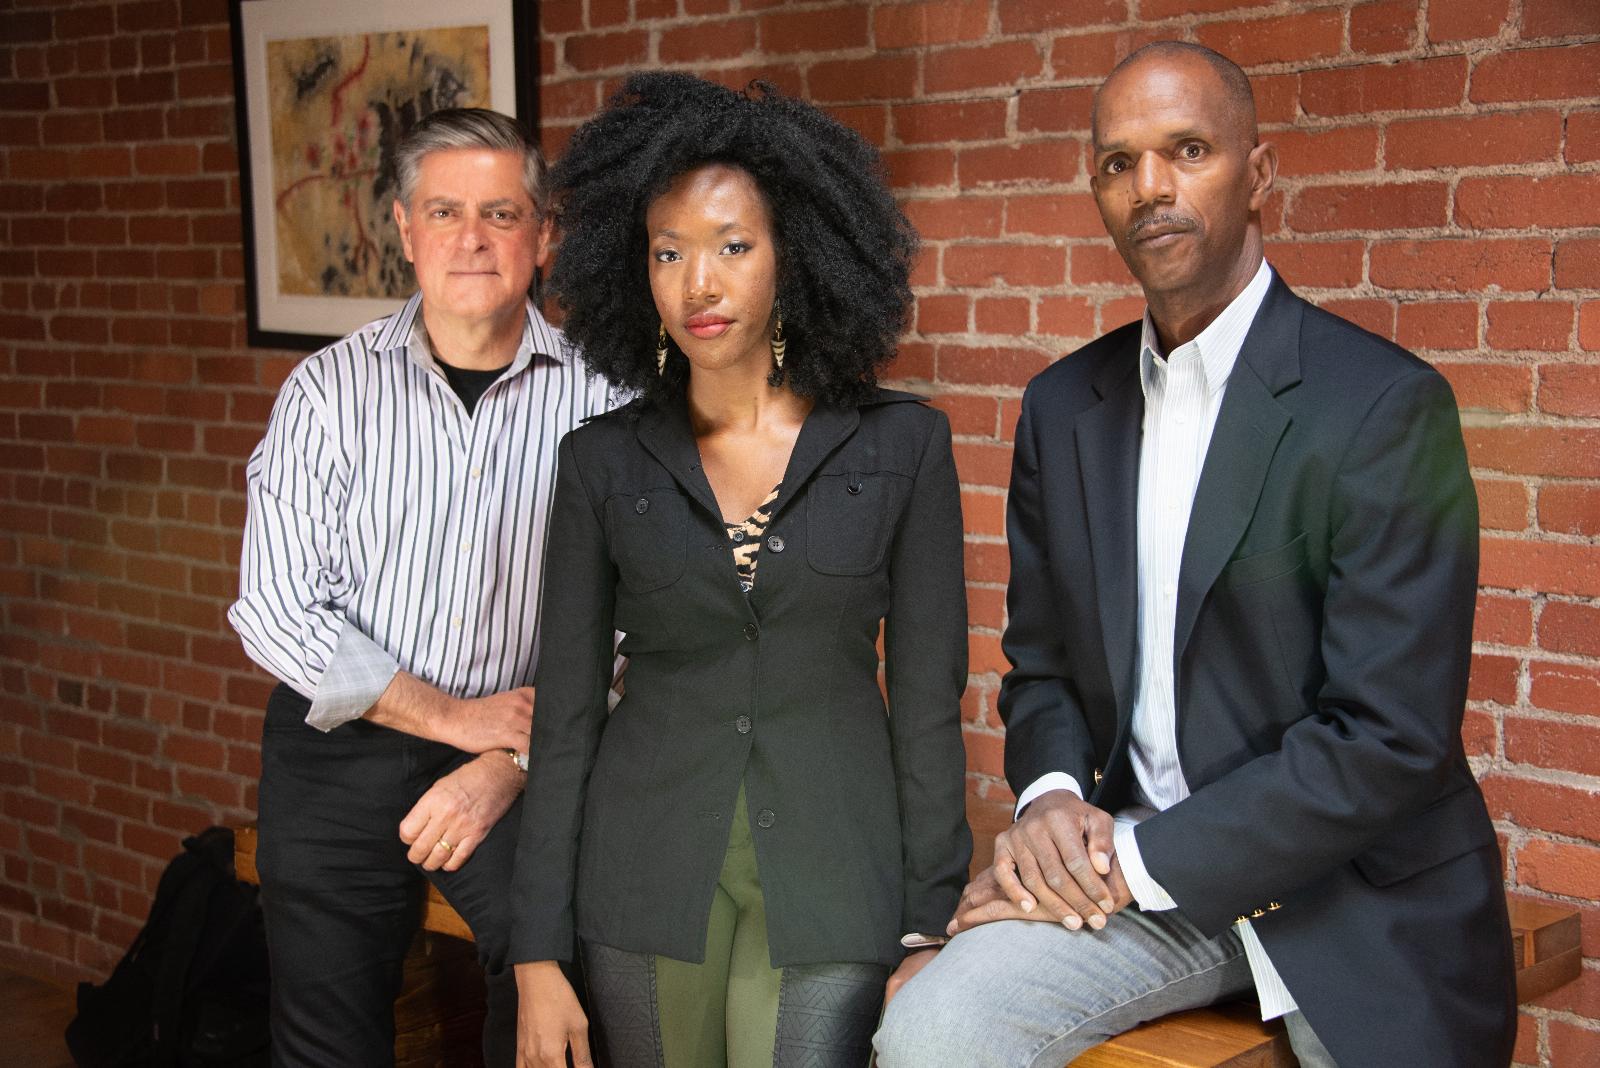 Black Tech Nation Ventures’ diversity thesis undeterred by growing DEI backlash